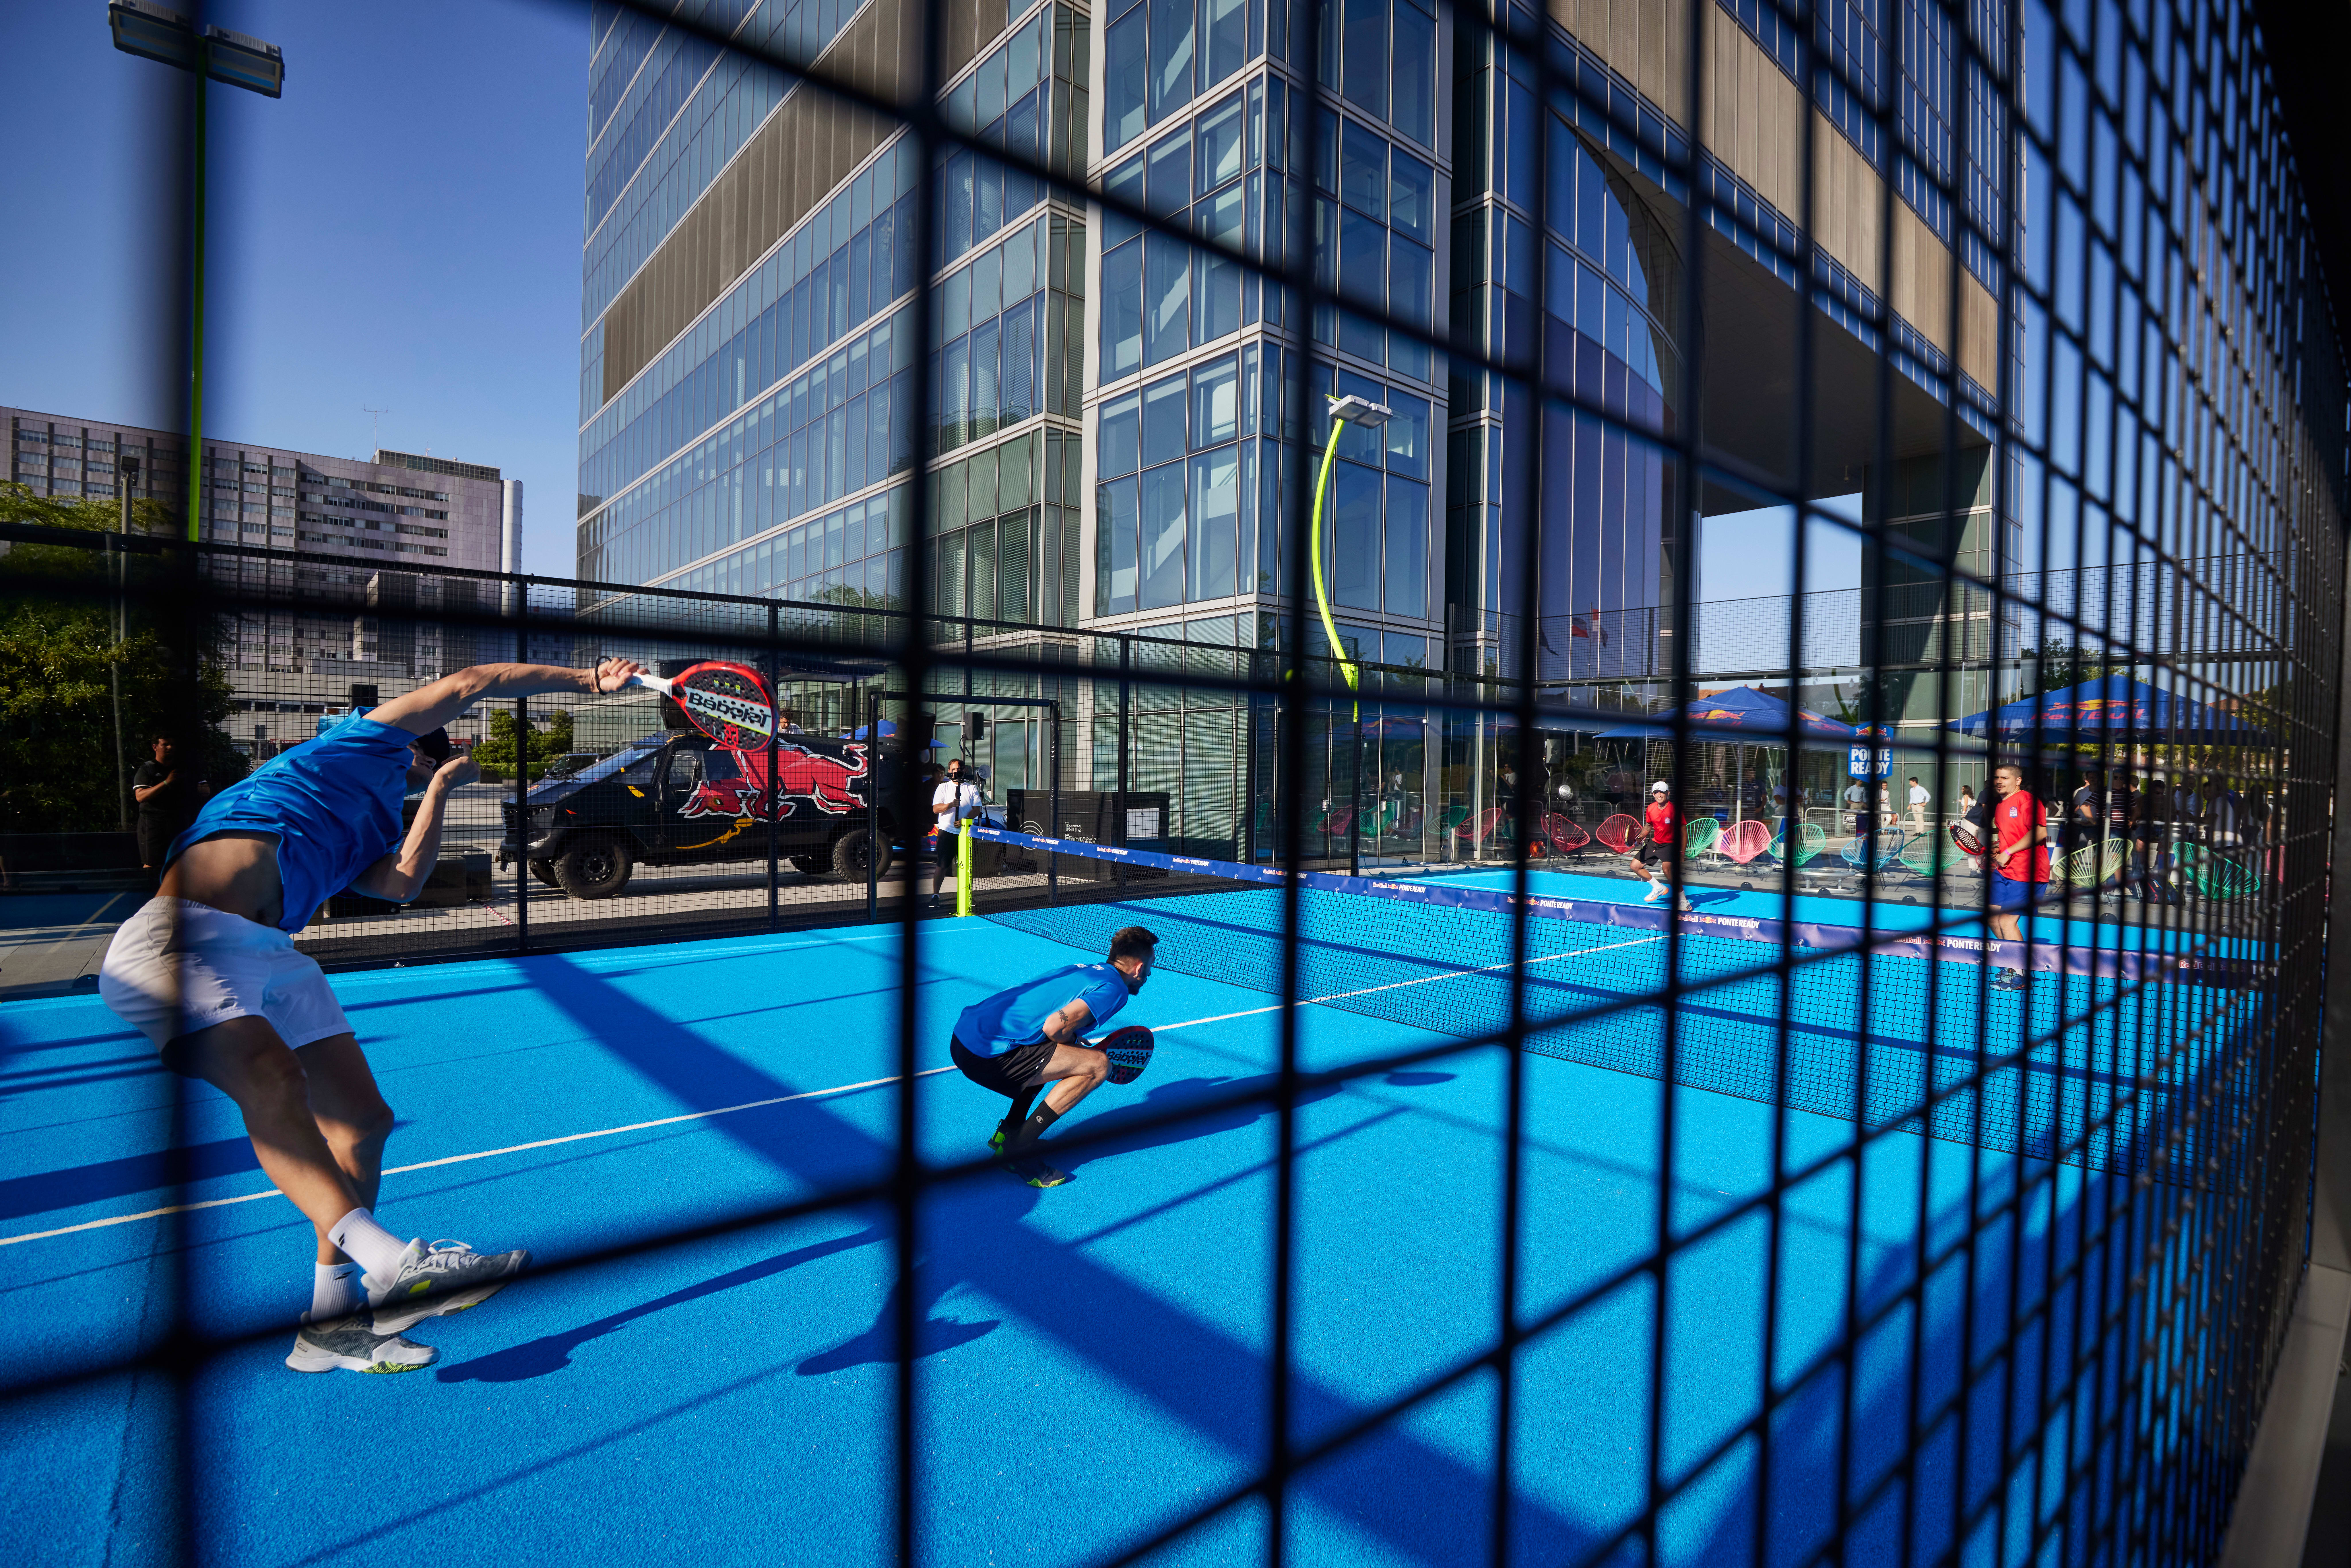 Learn the Essential Rules to Play Padel